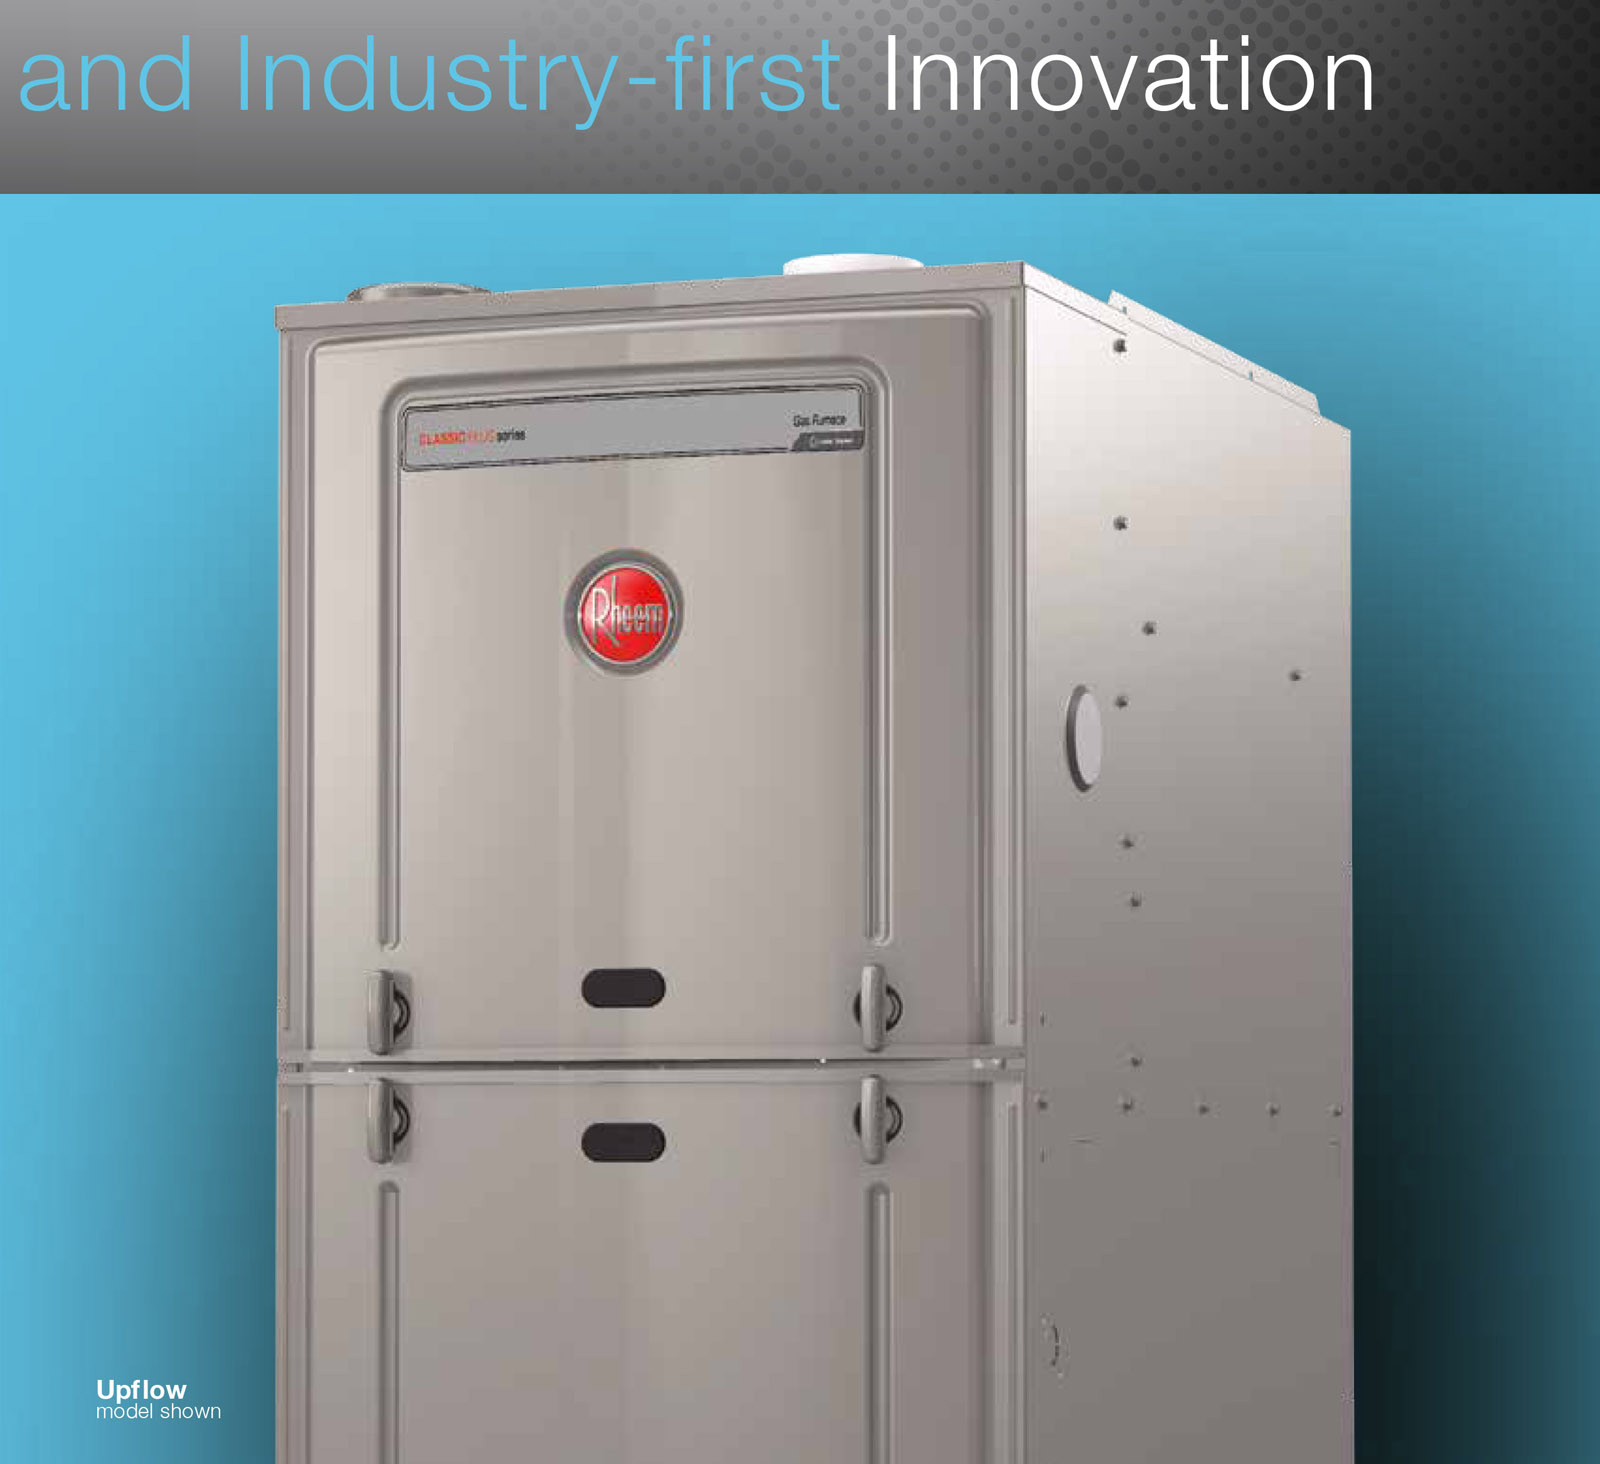 Industry first innovation. Upflow furnace model shown